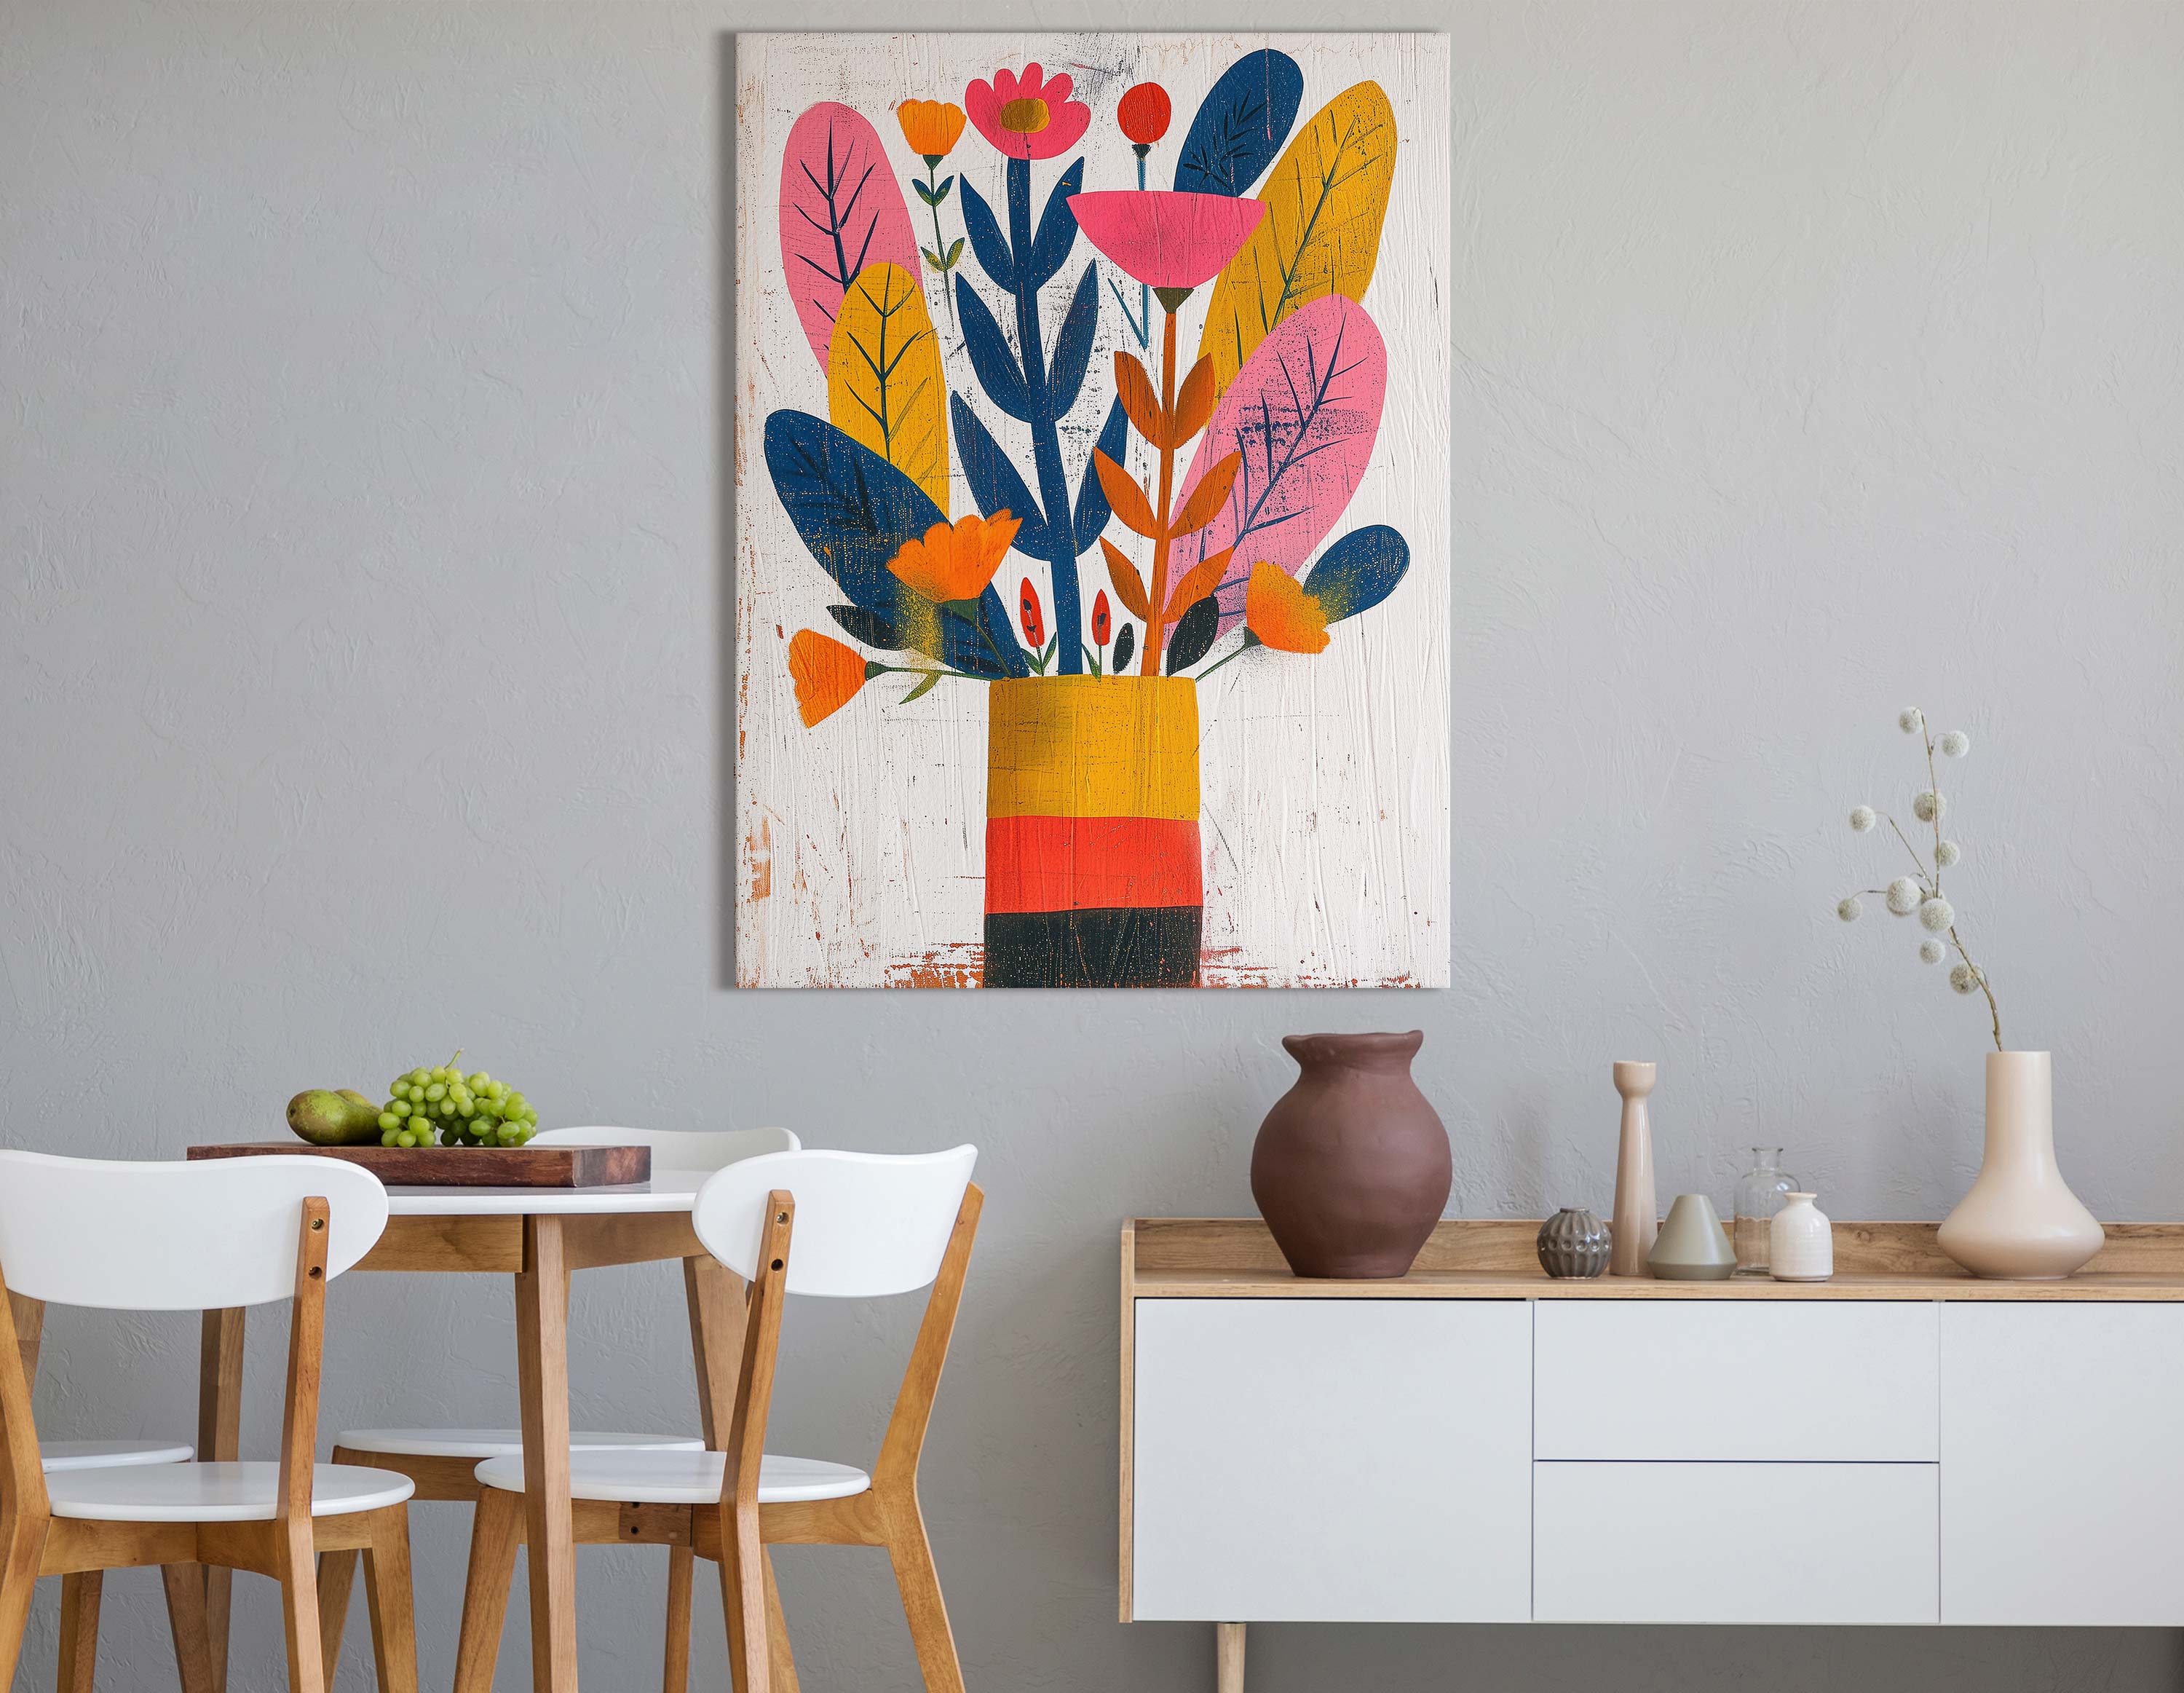 Stylized Flowers in Bold Vase Wall Print